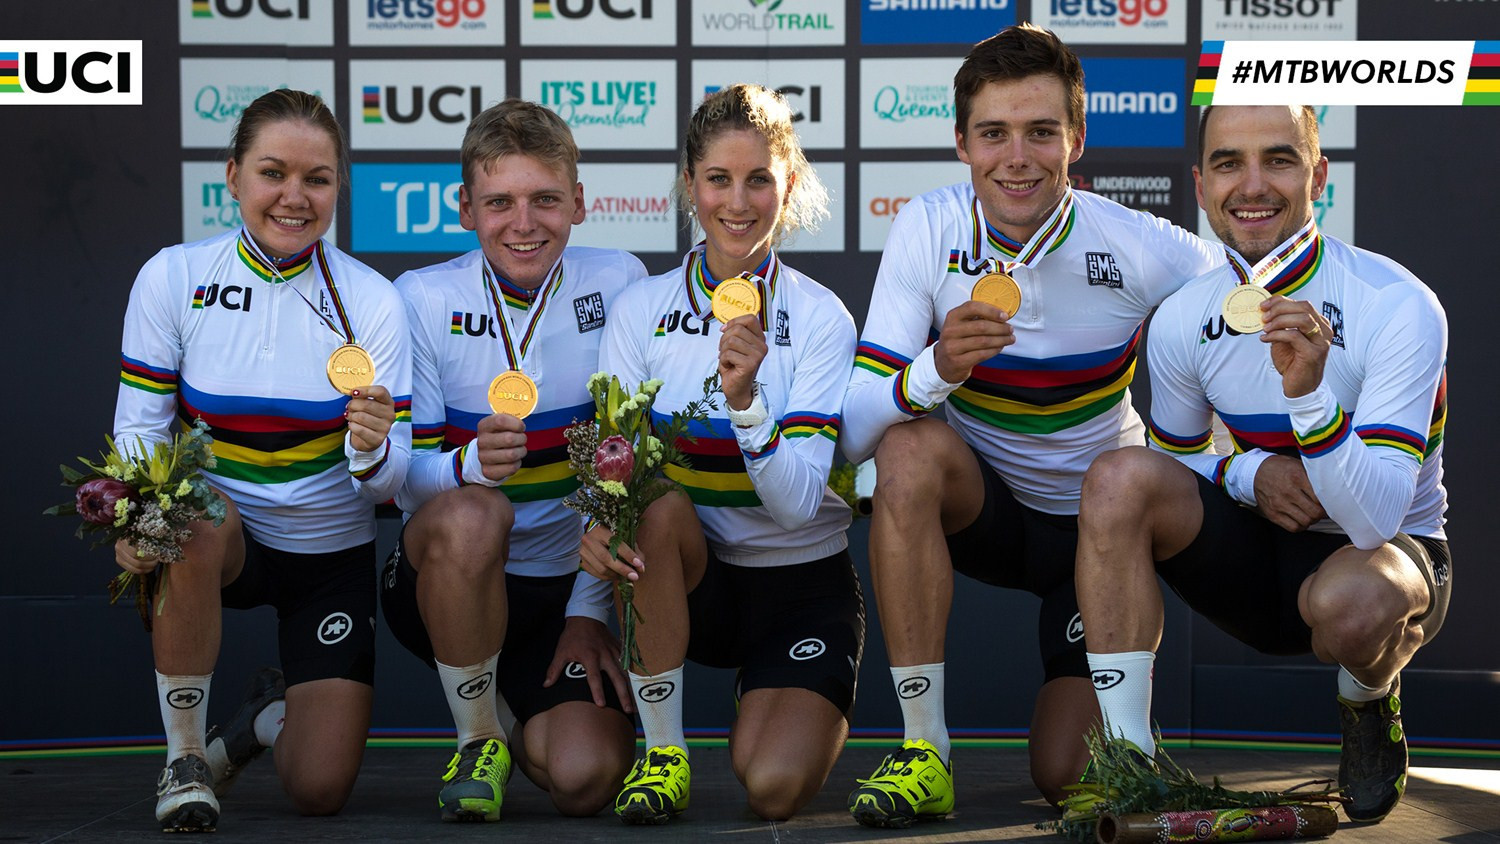 Switzerland triumphed in the team relay event on the opening day of the Championships ©UCI/Michal Červený